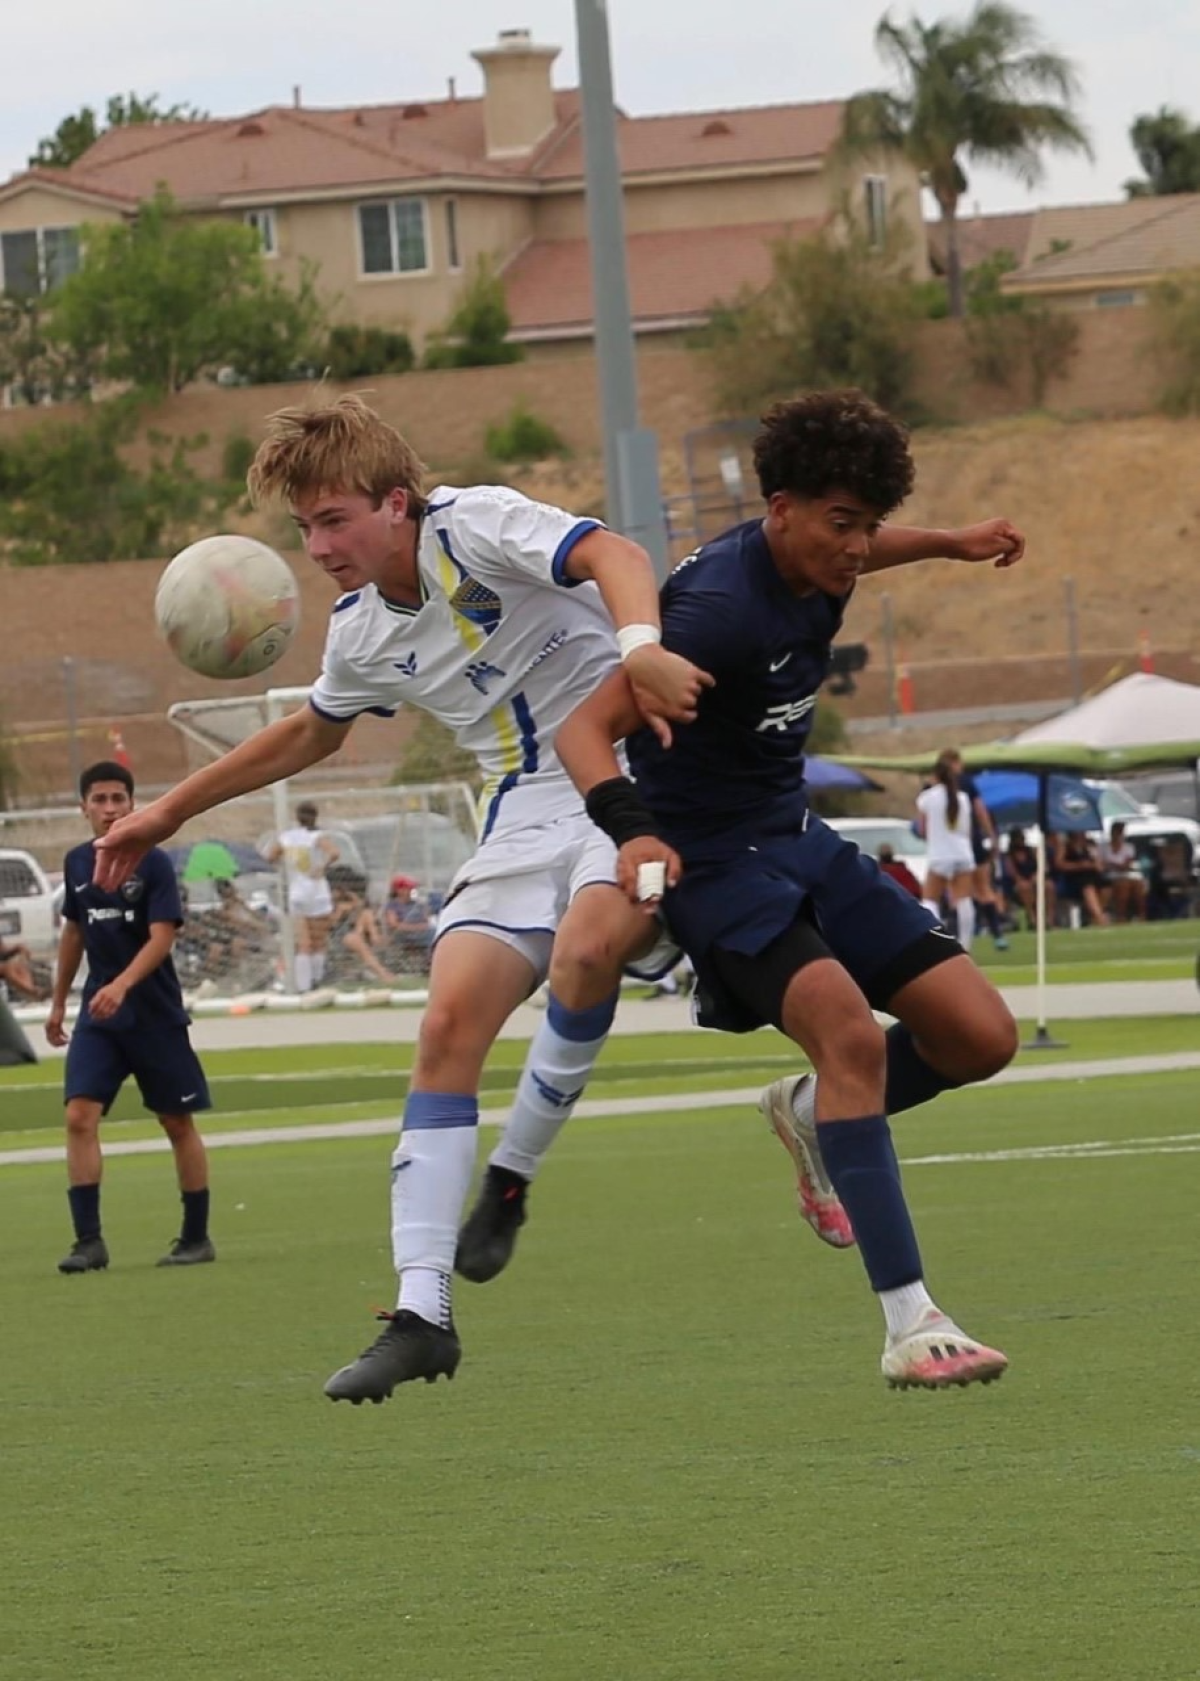 Zac Fraser (left) from the 2005 Boys Cardiff Sockers against Rebels SC San Diego in the So Cal State Cup Soccer Championship.